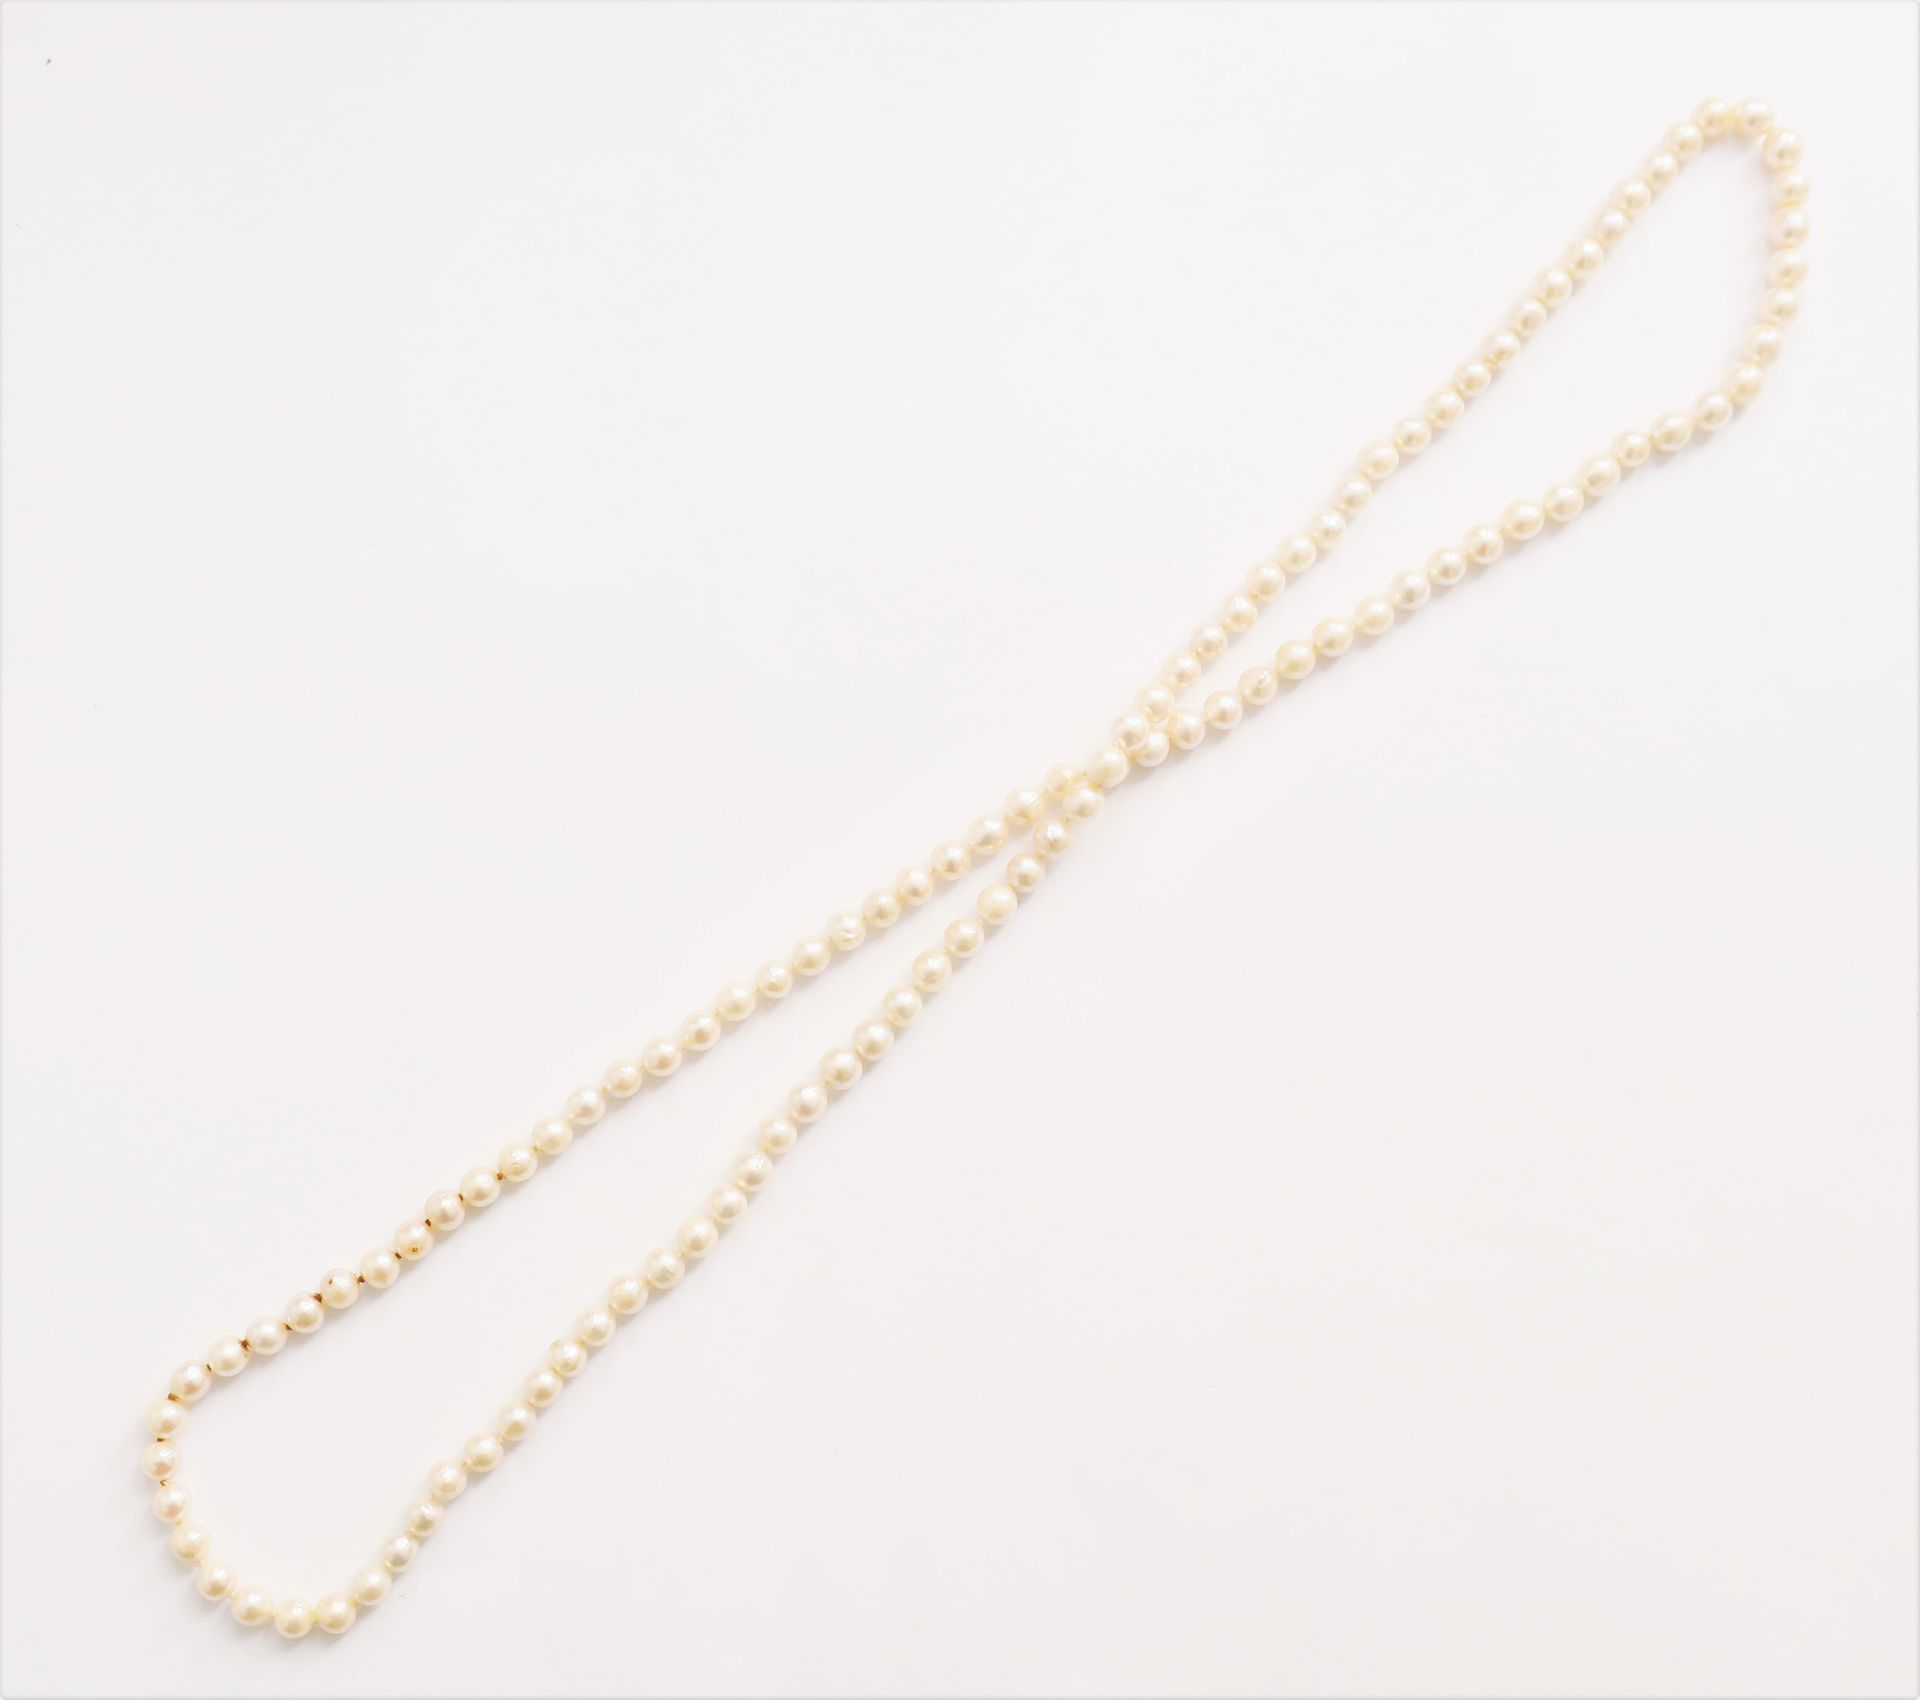 Null Baroque cultured pearl necklace. Length: 82 cm approximately